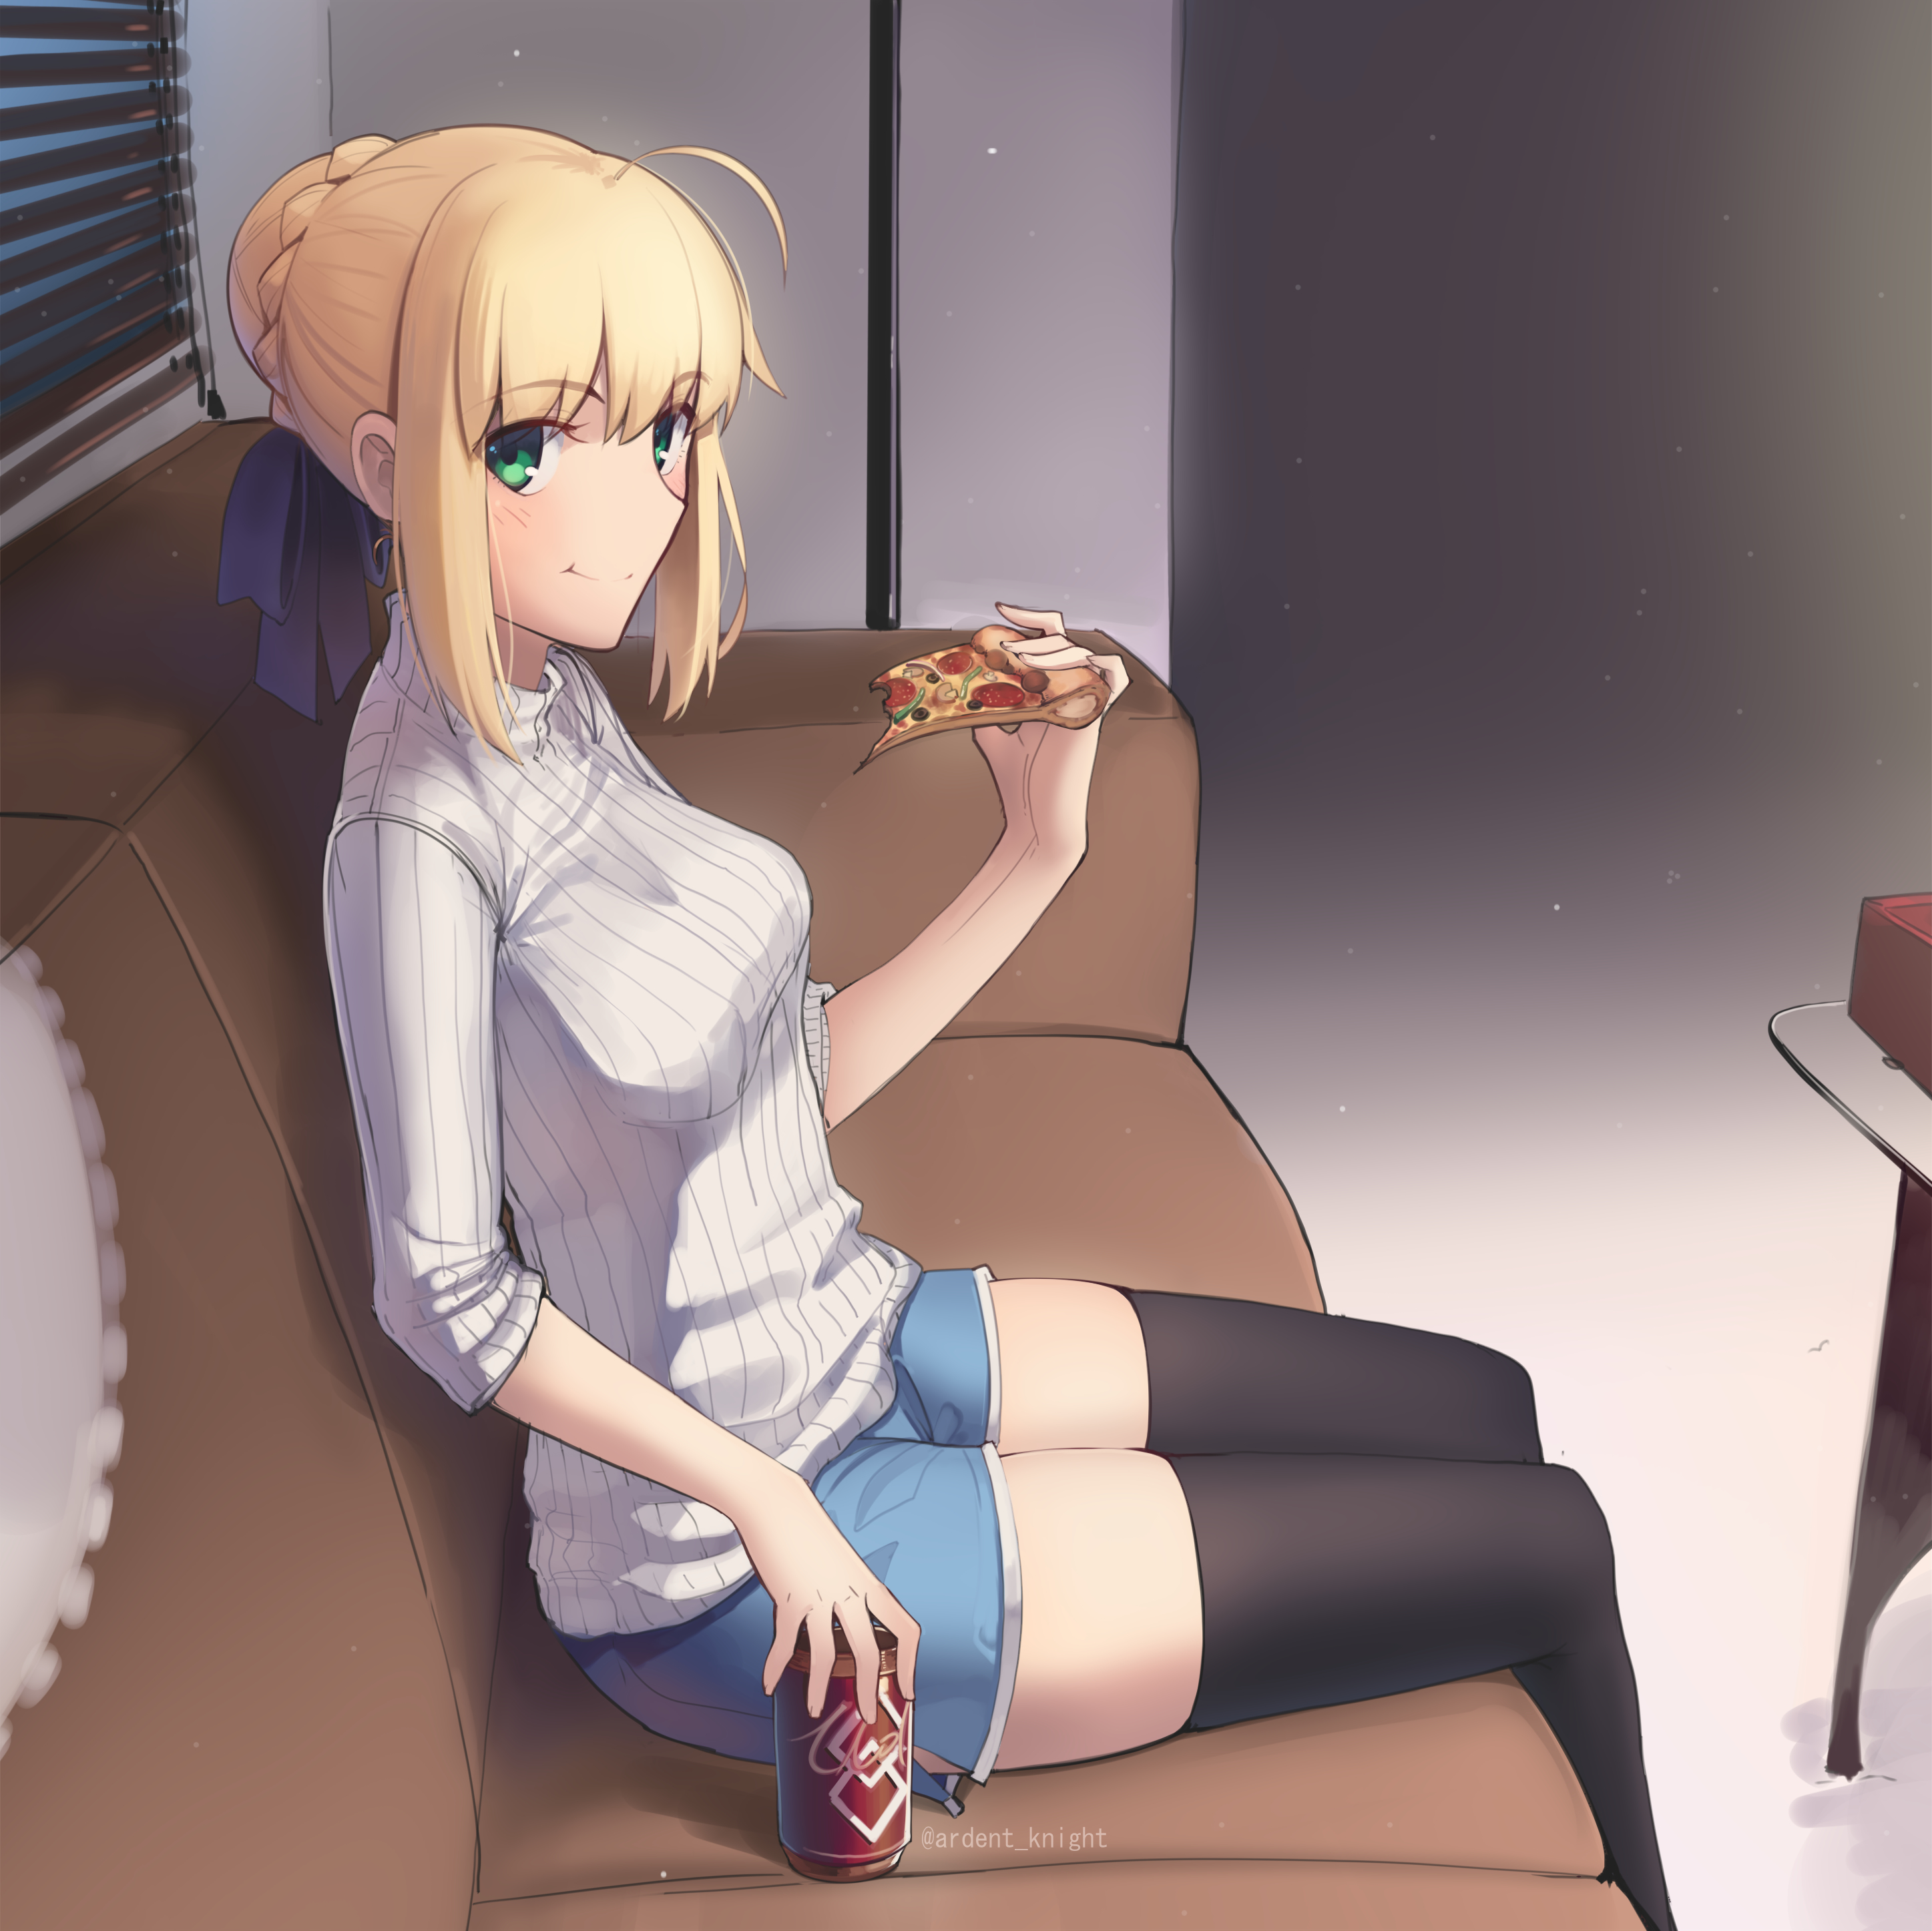 Anime 2894x2893 Fate series Fate/Grand Order Fate/Stay Night anime girls fan art 2D anime girls eating looking at viewer jean shorts thigh-highs black stockings braids Saber green eyes blonde Artoria Pendragon